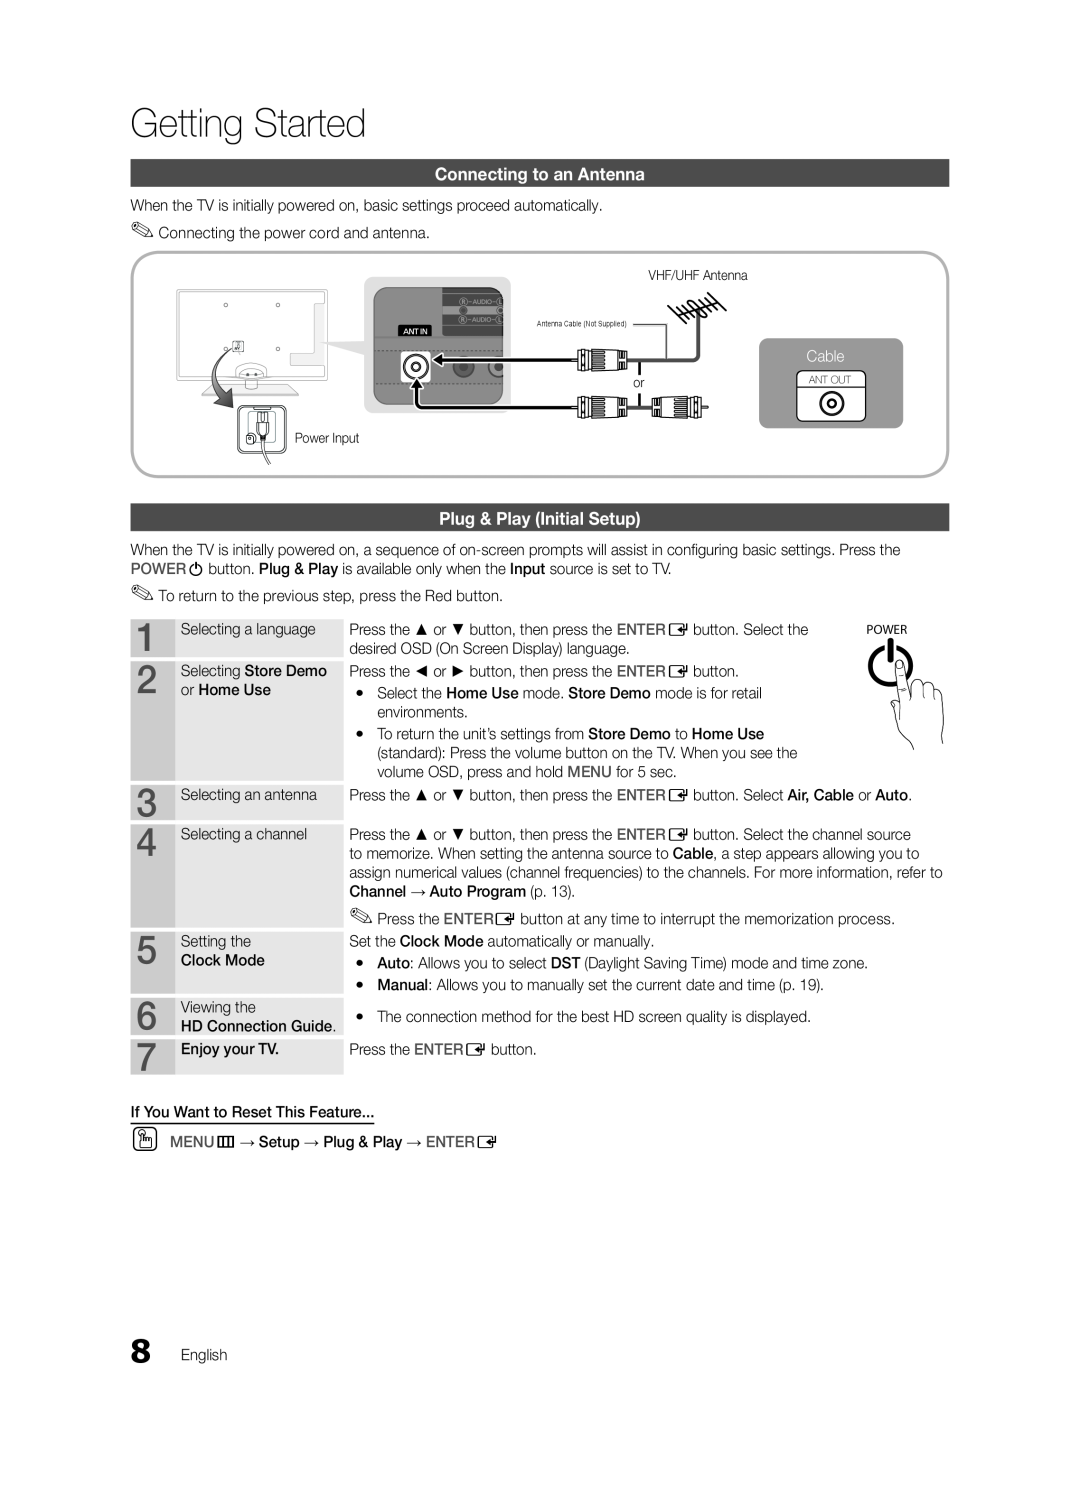 Samsung BN68-03165B-01, UC6300-ZC user manual Connecting to an Antenna, Plug & Play Initial Setup, Cable, Getting Started 